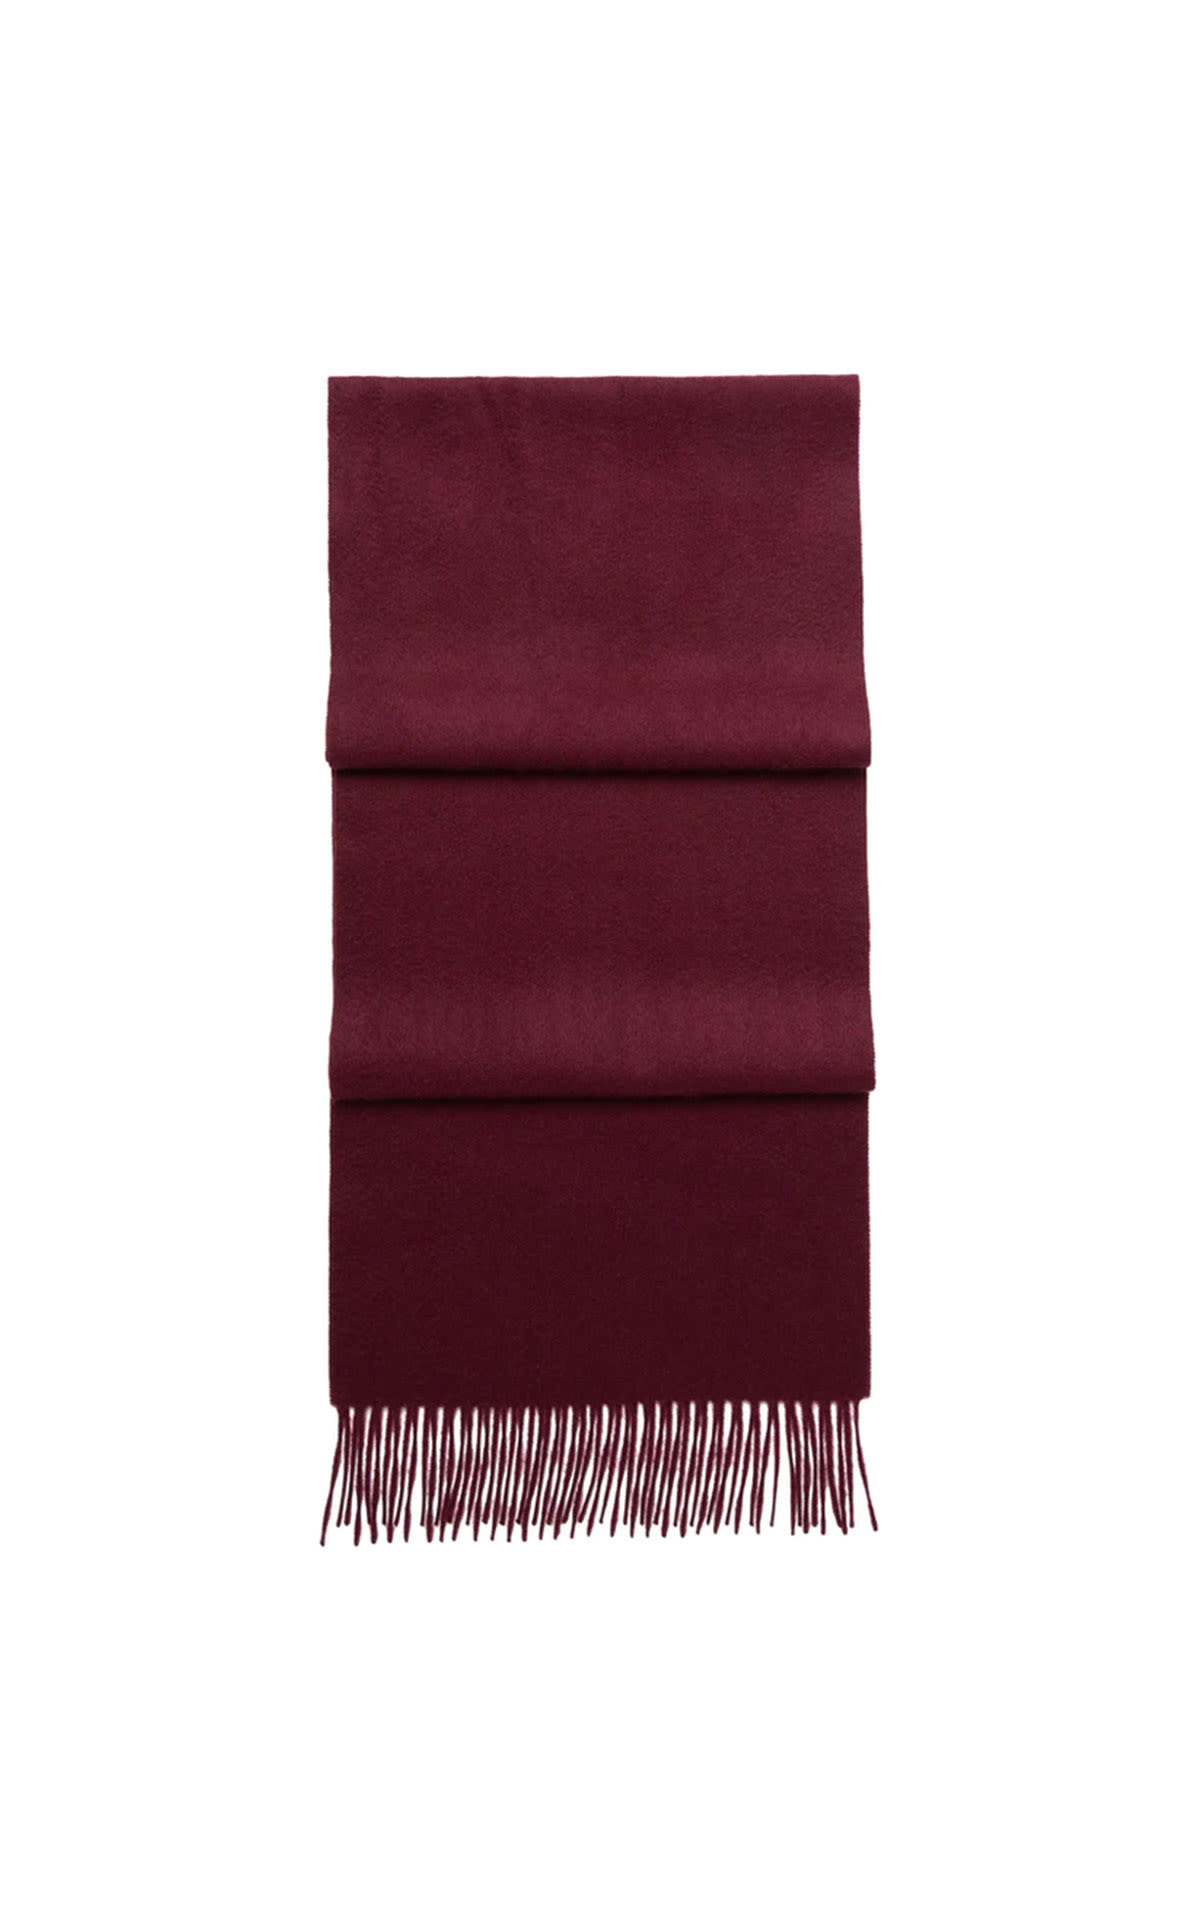 N.Peal Large woven cashmere scarf mulled wine red from Bicester Village